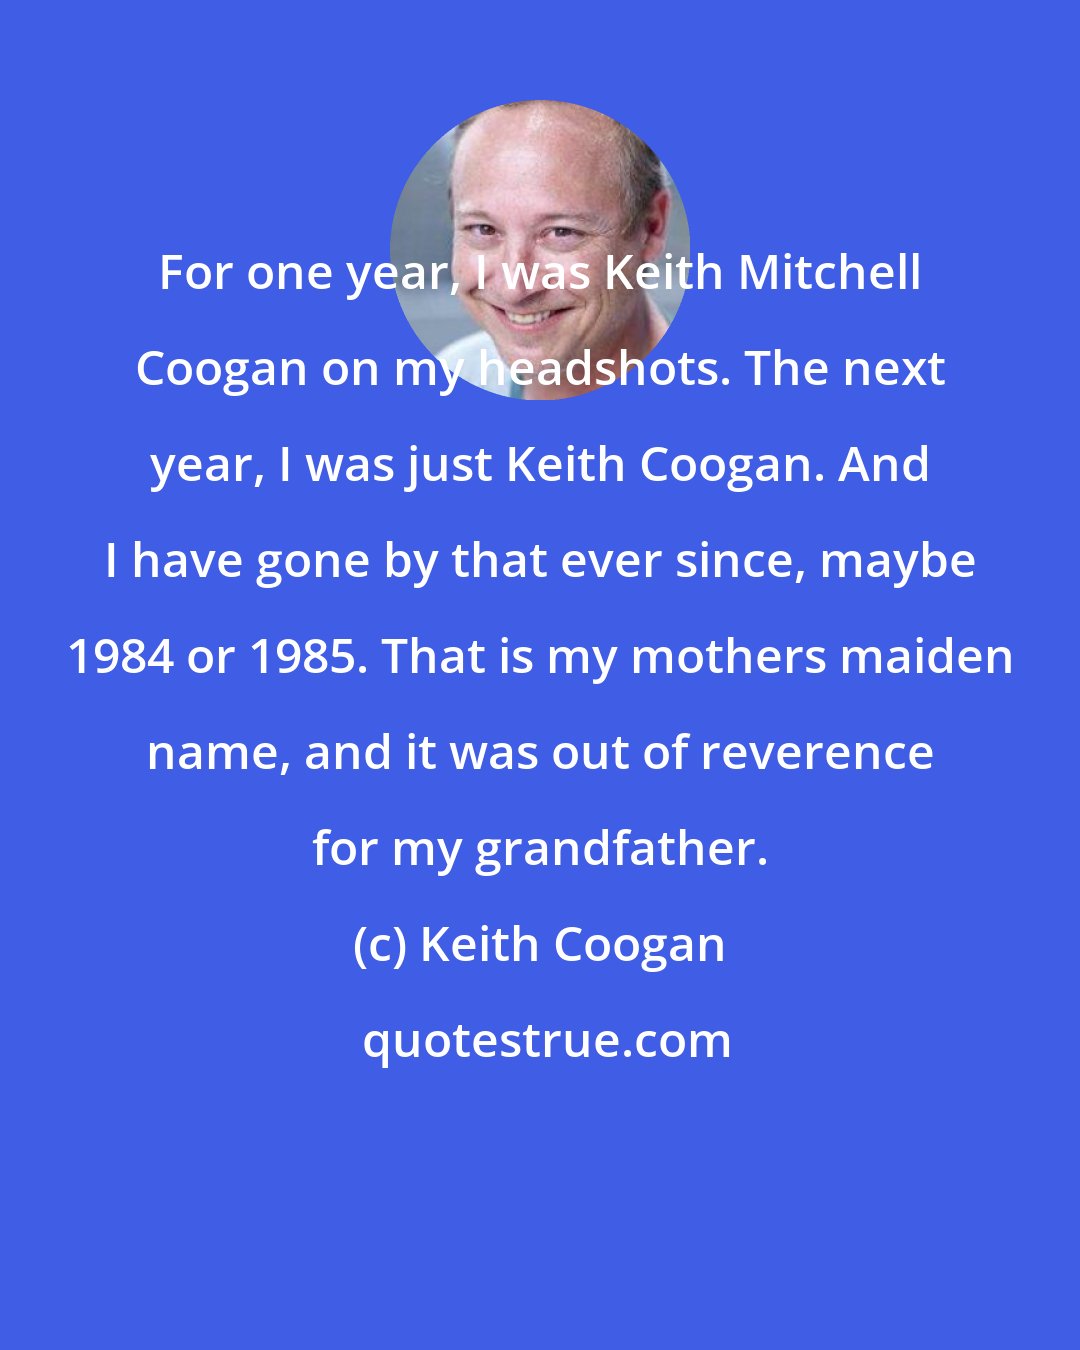 Keith Coogan: For one year, I was Keith Mitchell Coogan on my headshots. The next year, I was just Keith Coogan. And I have gone by that ever since, maybe 1984 or 1985. That is my mothers maiden name, and it was out of reverence for my grandfather.